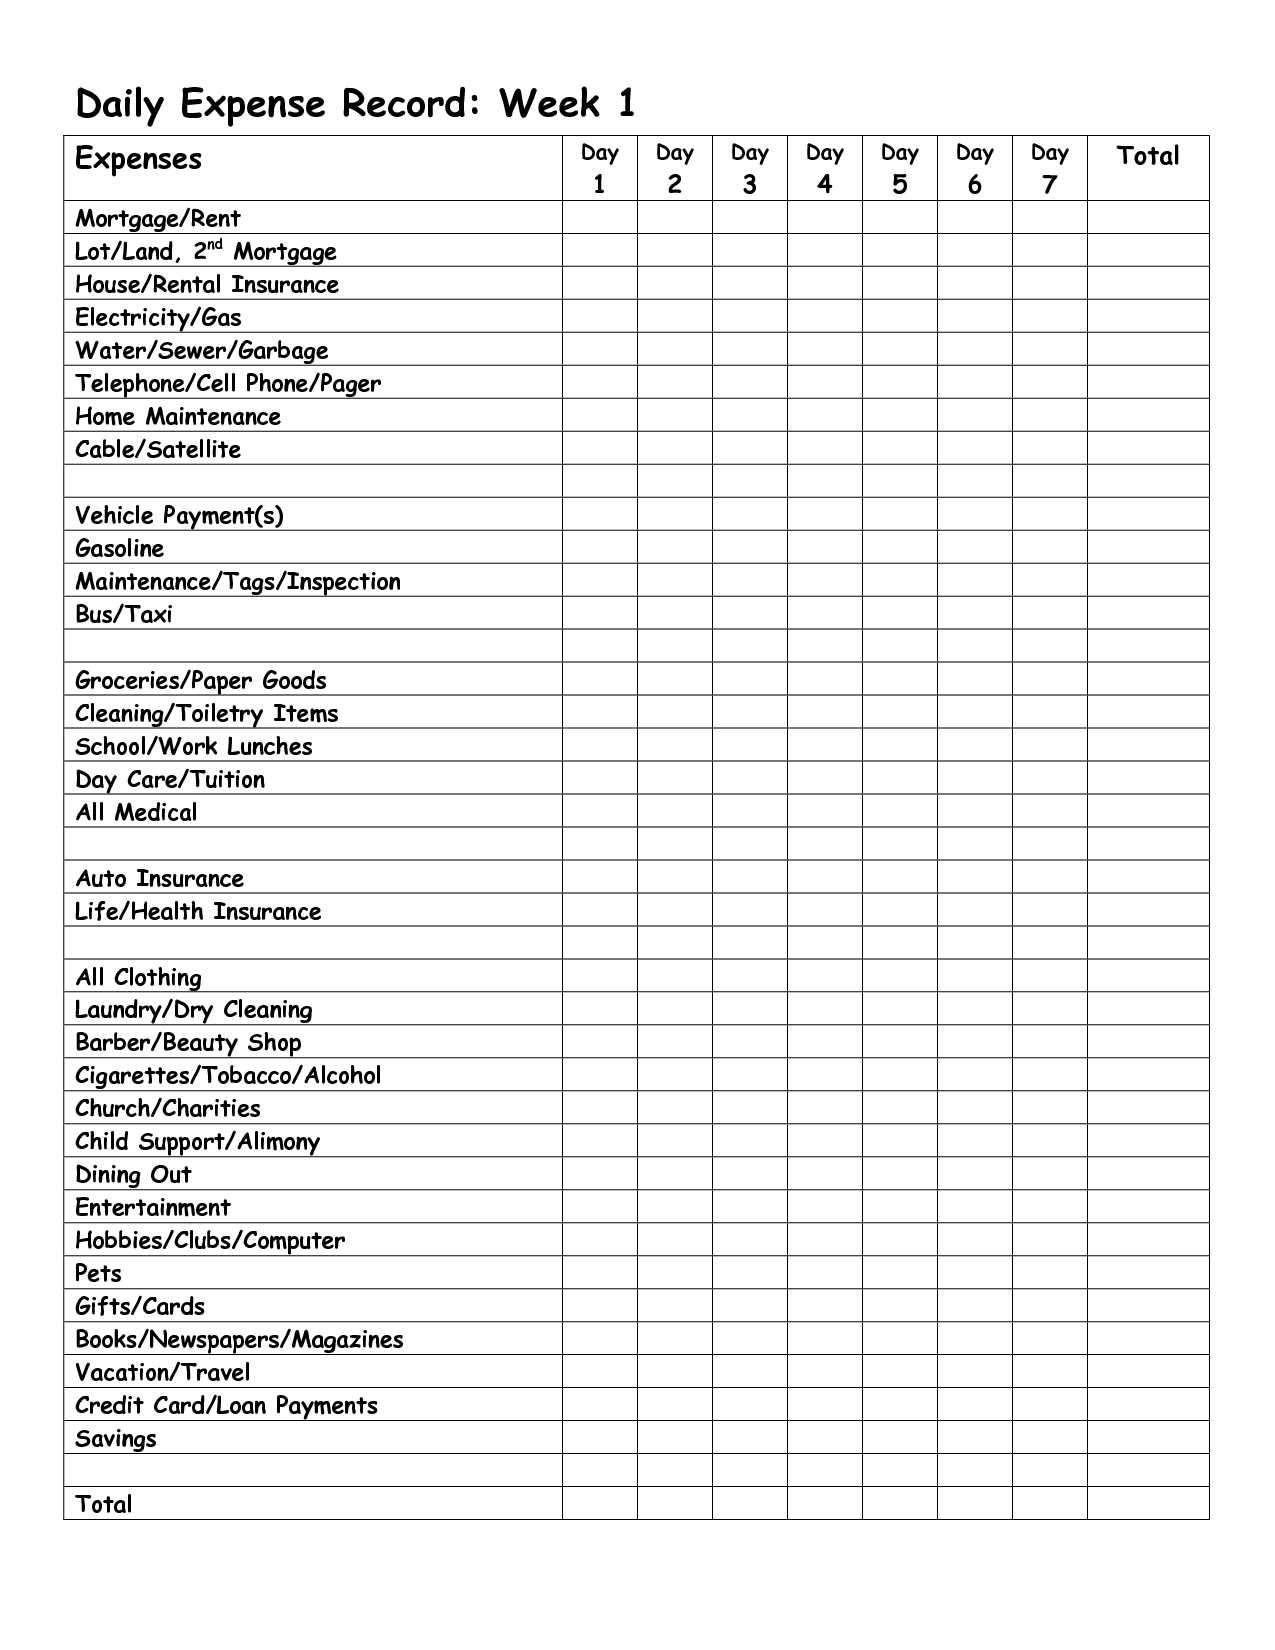 Indian Wedding Expenses Spreadsheet With Indian Wedding Budget Spreadsheet Or Daily Bud T Design Monthly